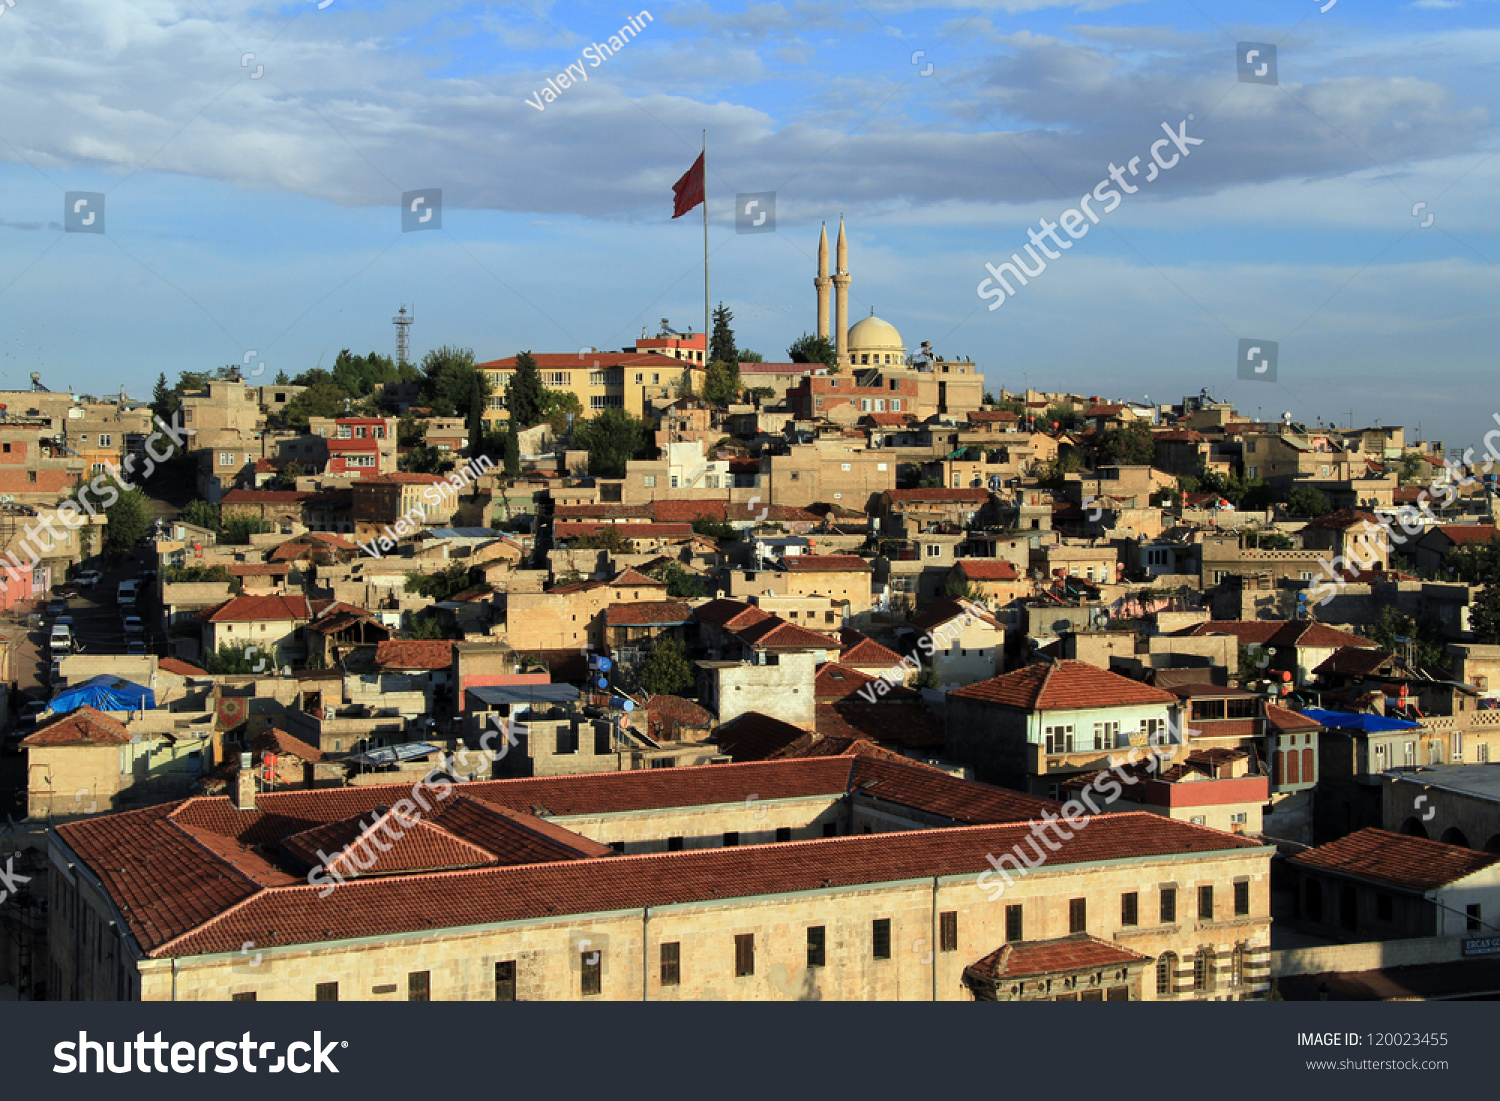 Buildings on the hill in the center of Gaziantep, Turkey #120023455